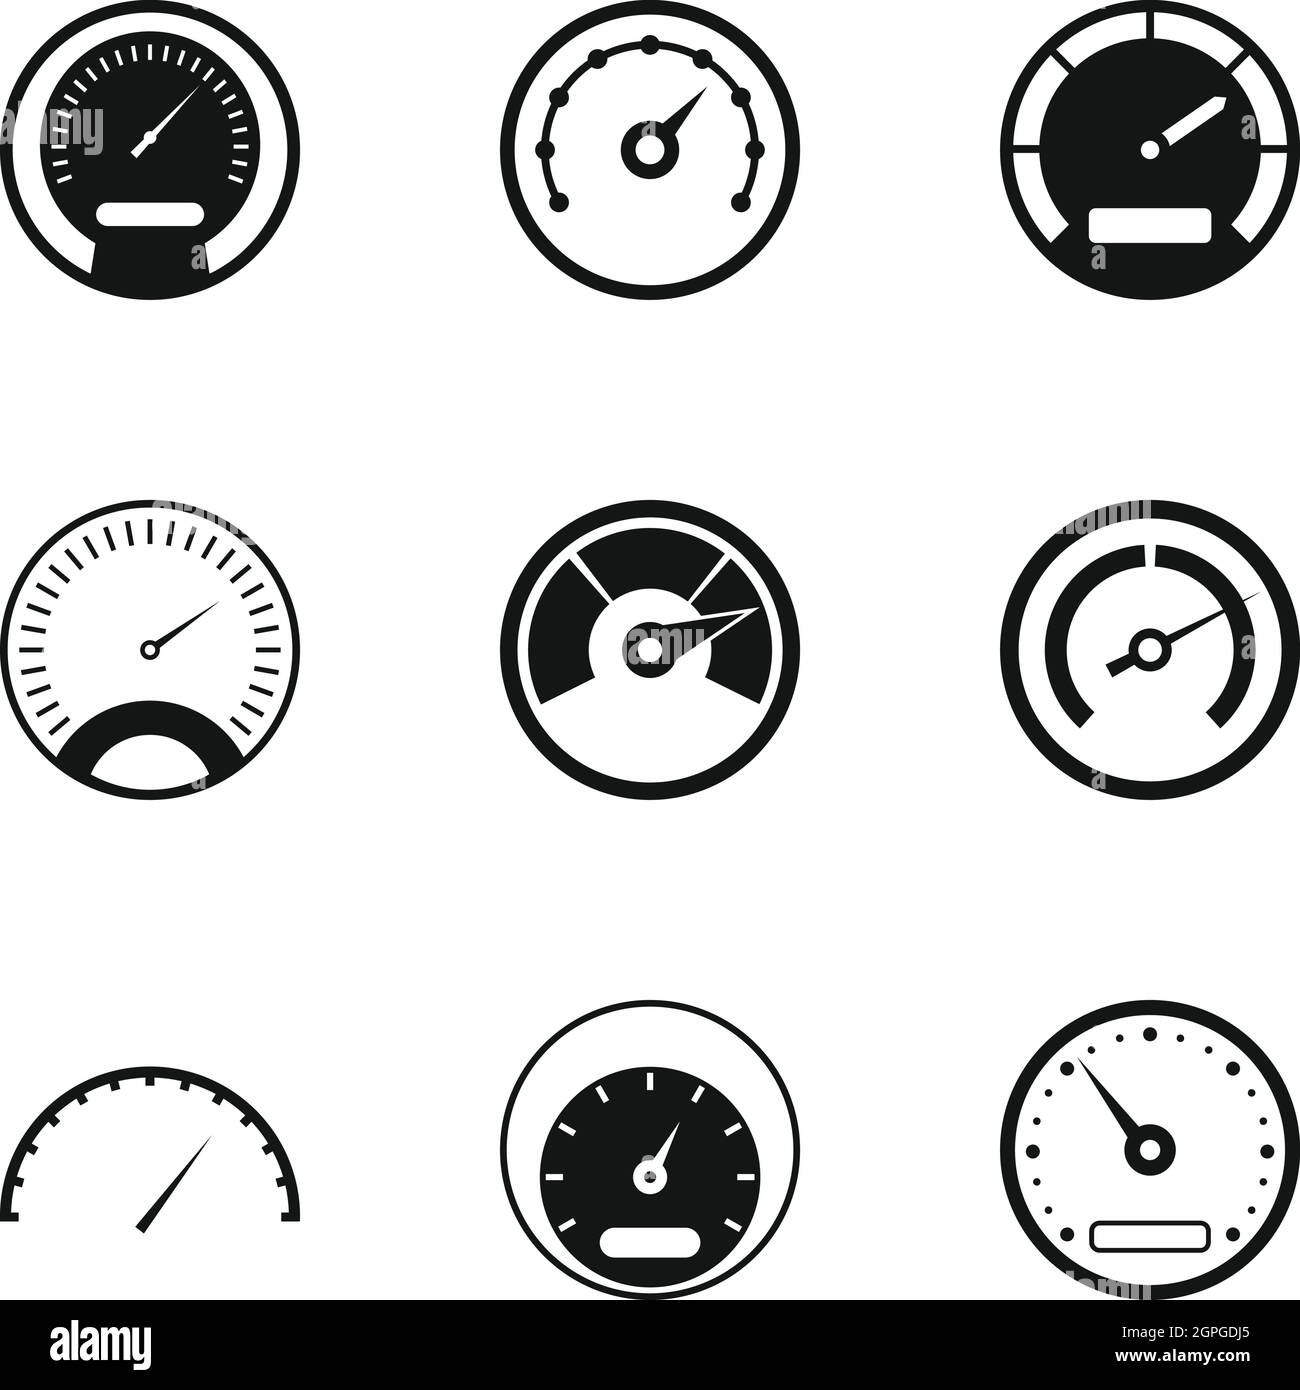 Speed measurement icons set, simple style Stock Vector